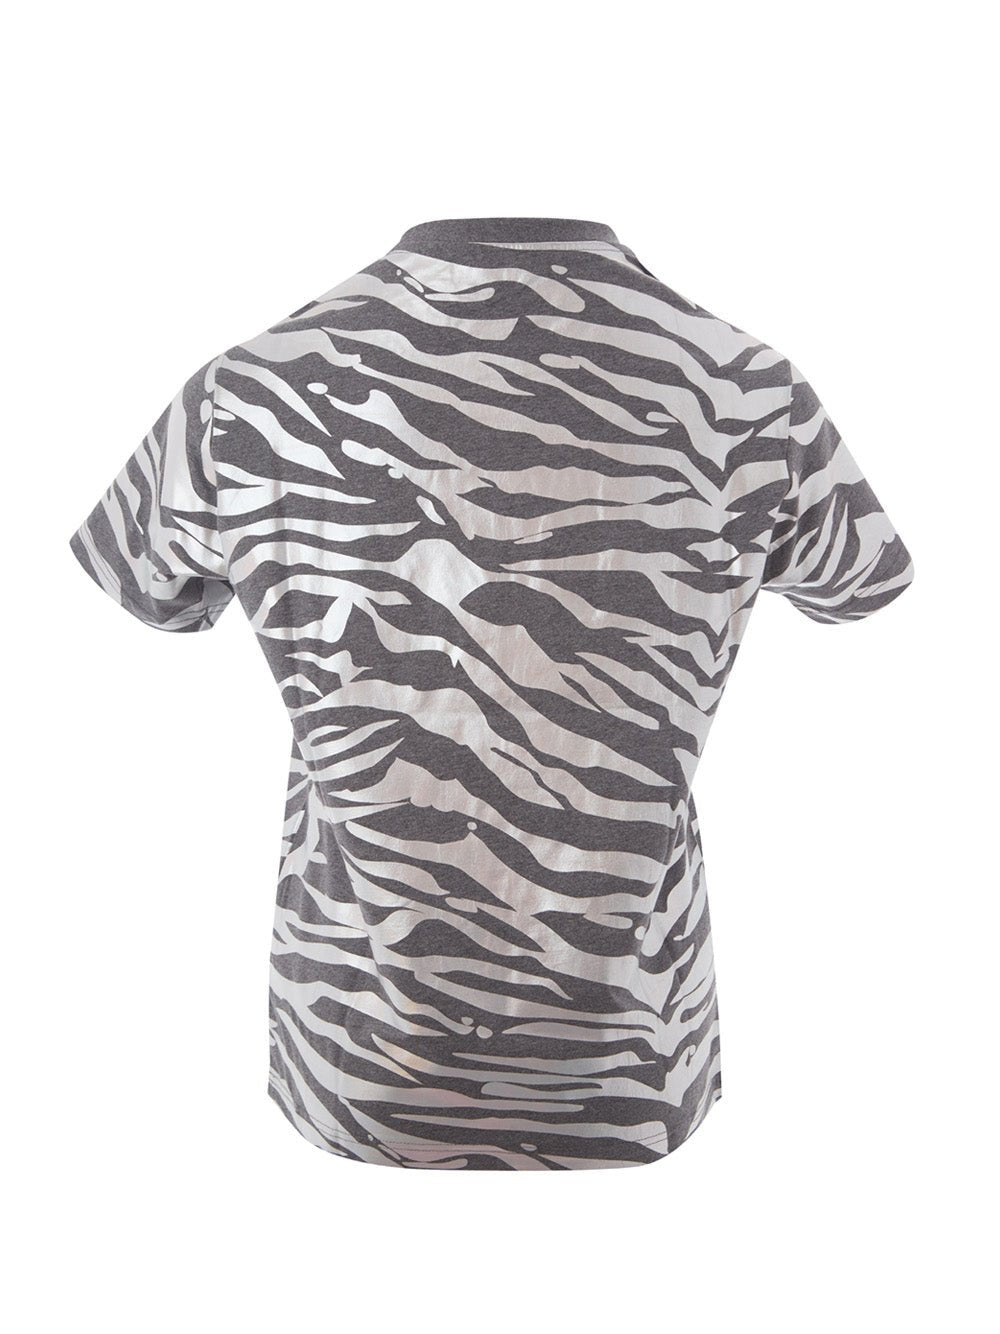 Kenzo Grey Cotton T-Shirt With Metal Animalier Print Allover